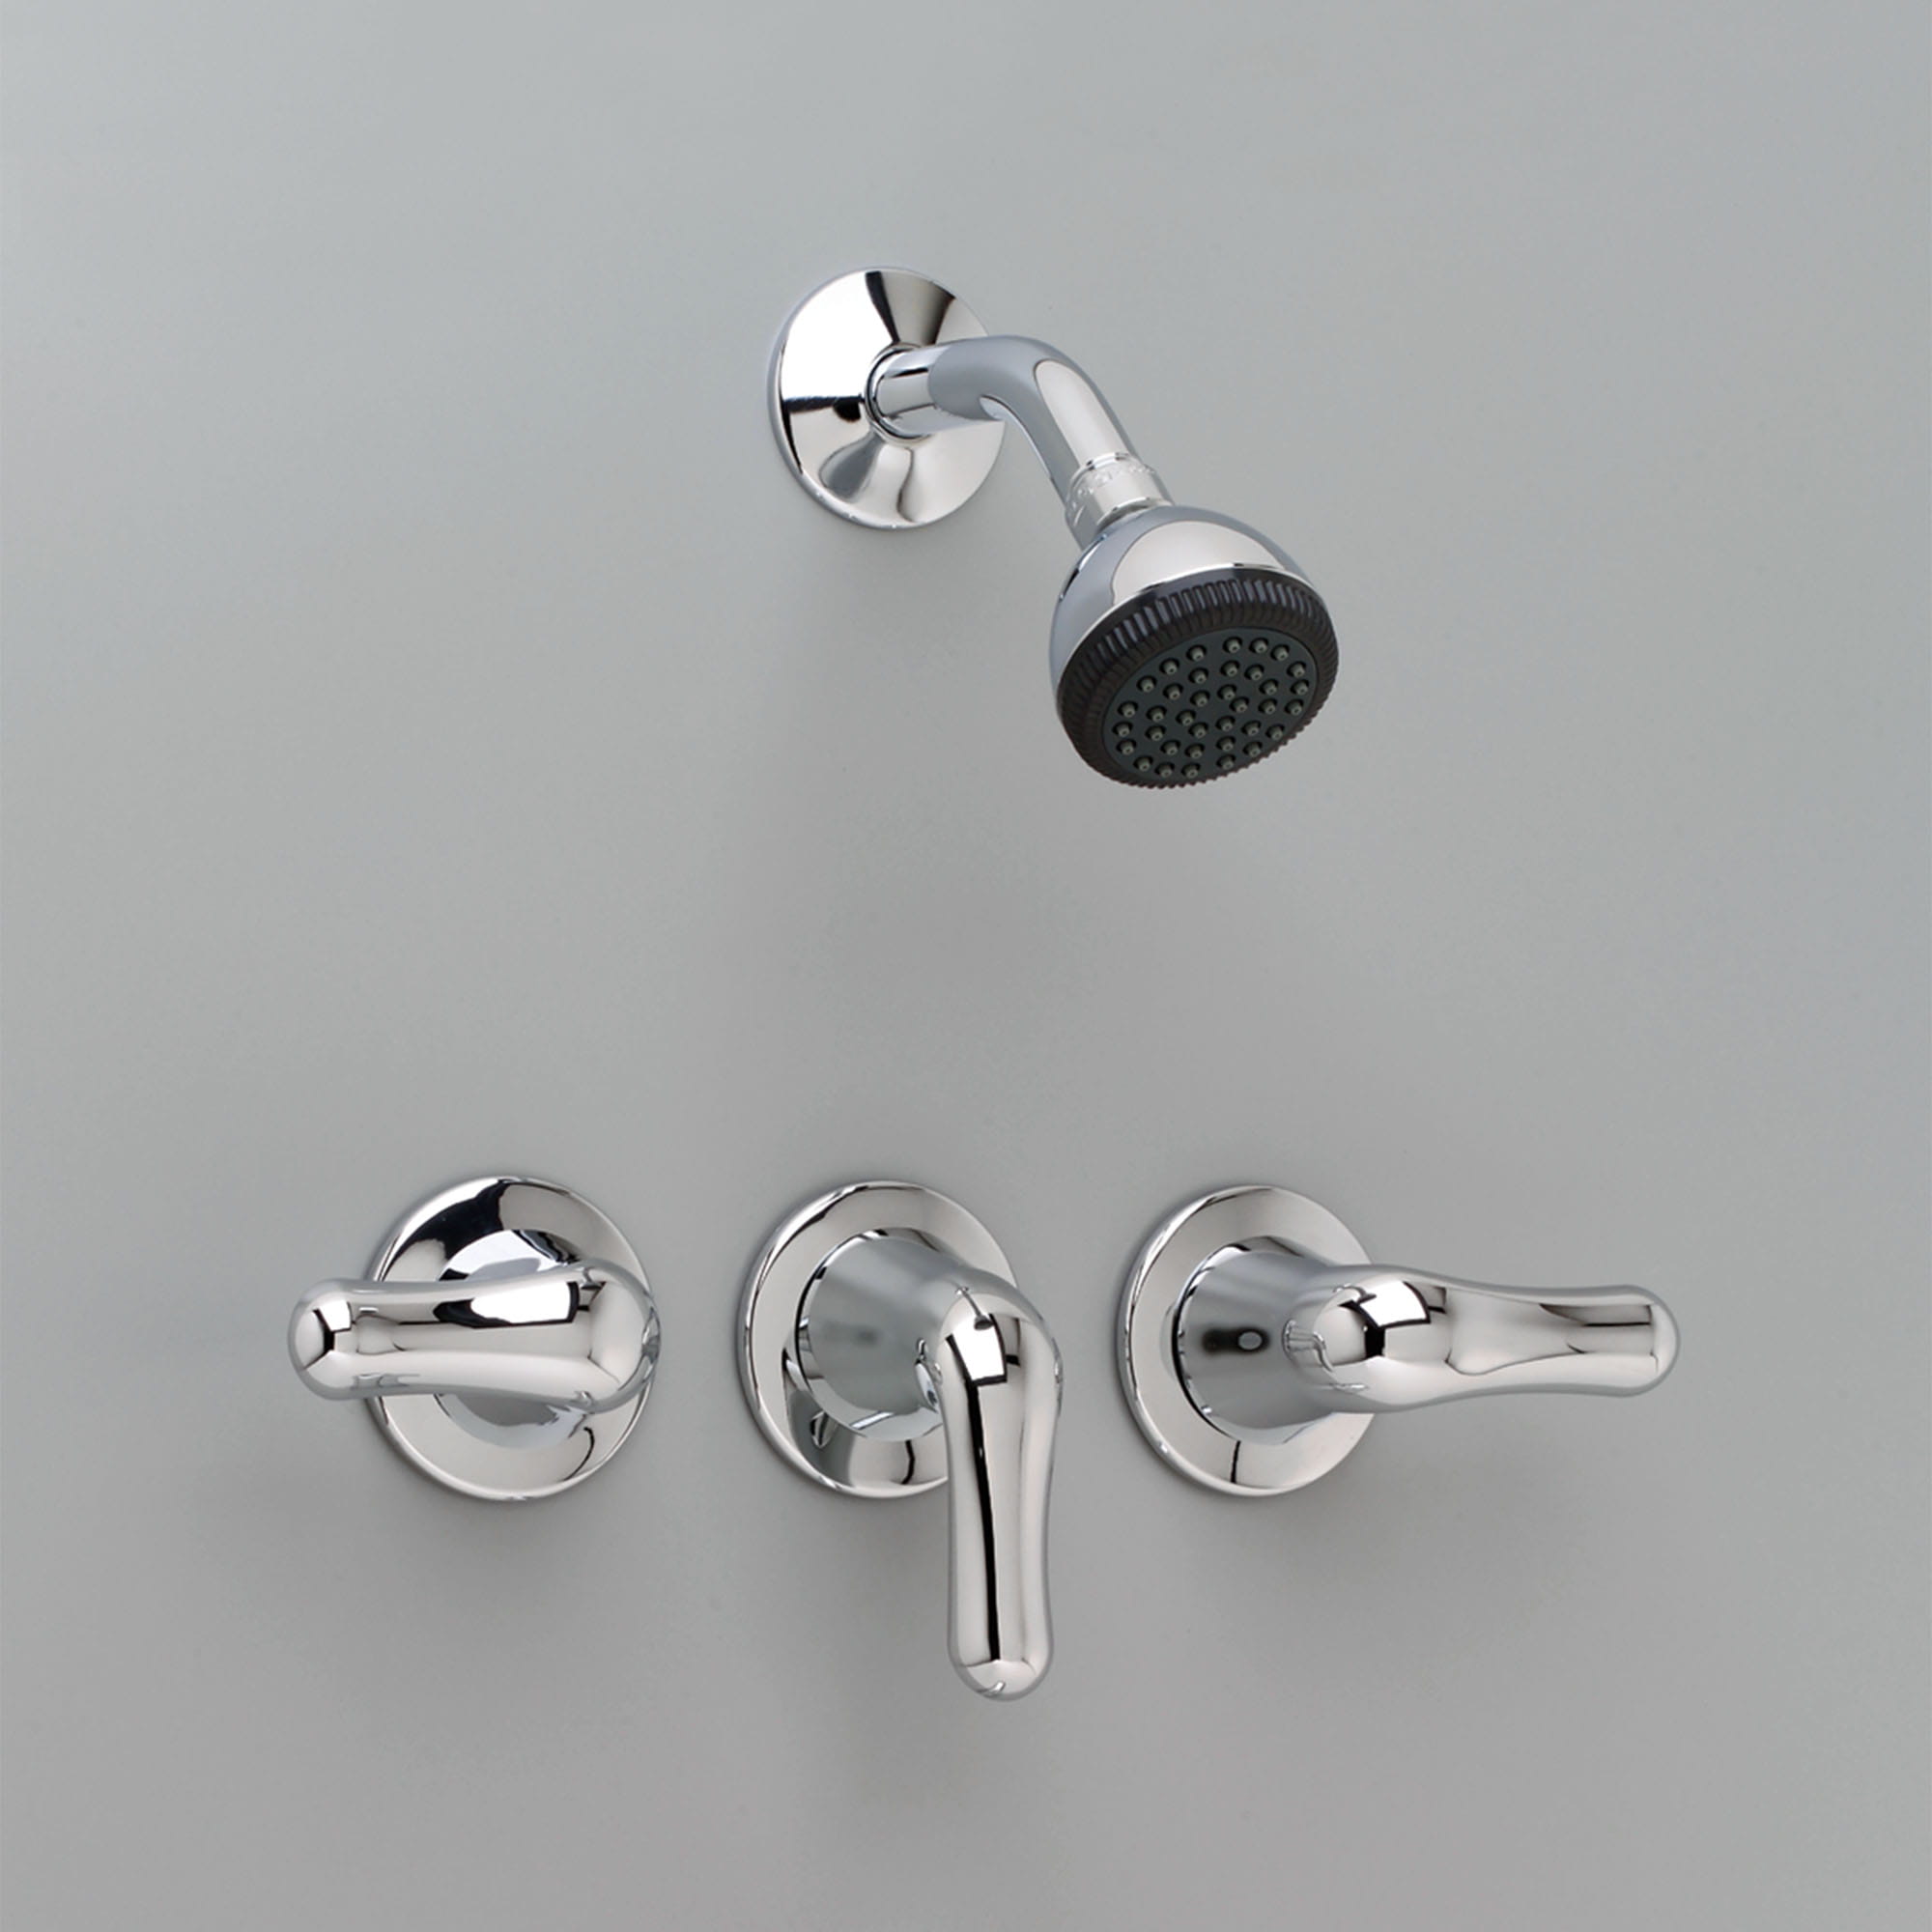 Colony Soft 25 gpm 95 L min 2 Handle Shower Valve and Trim Kit With Lever Handles CHROME